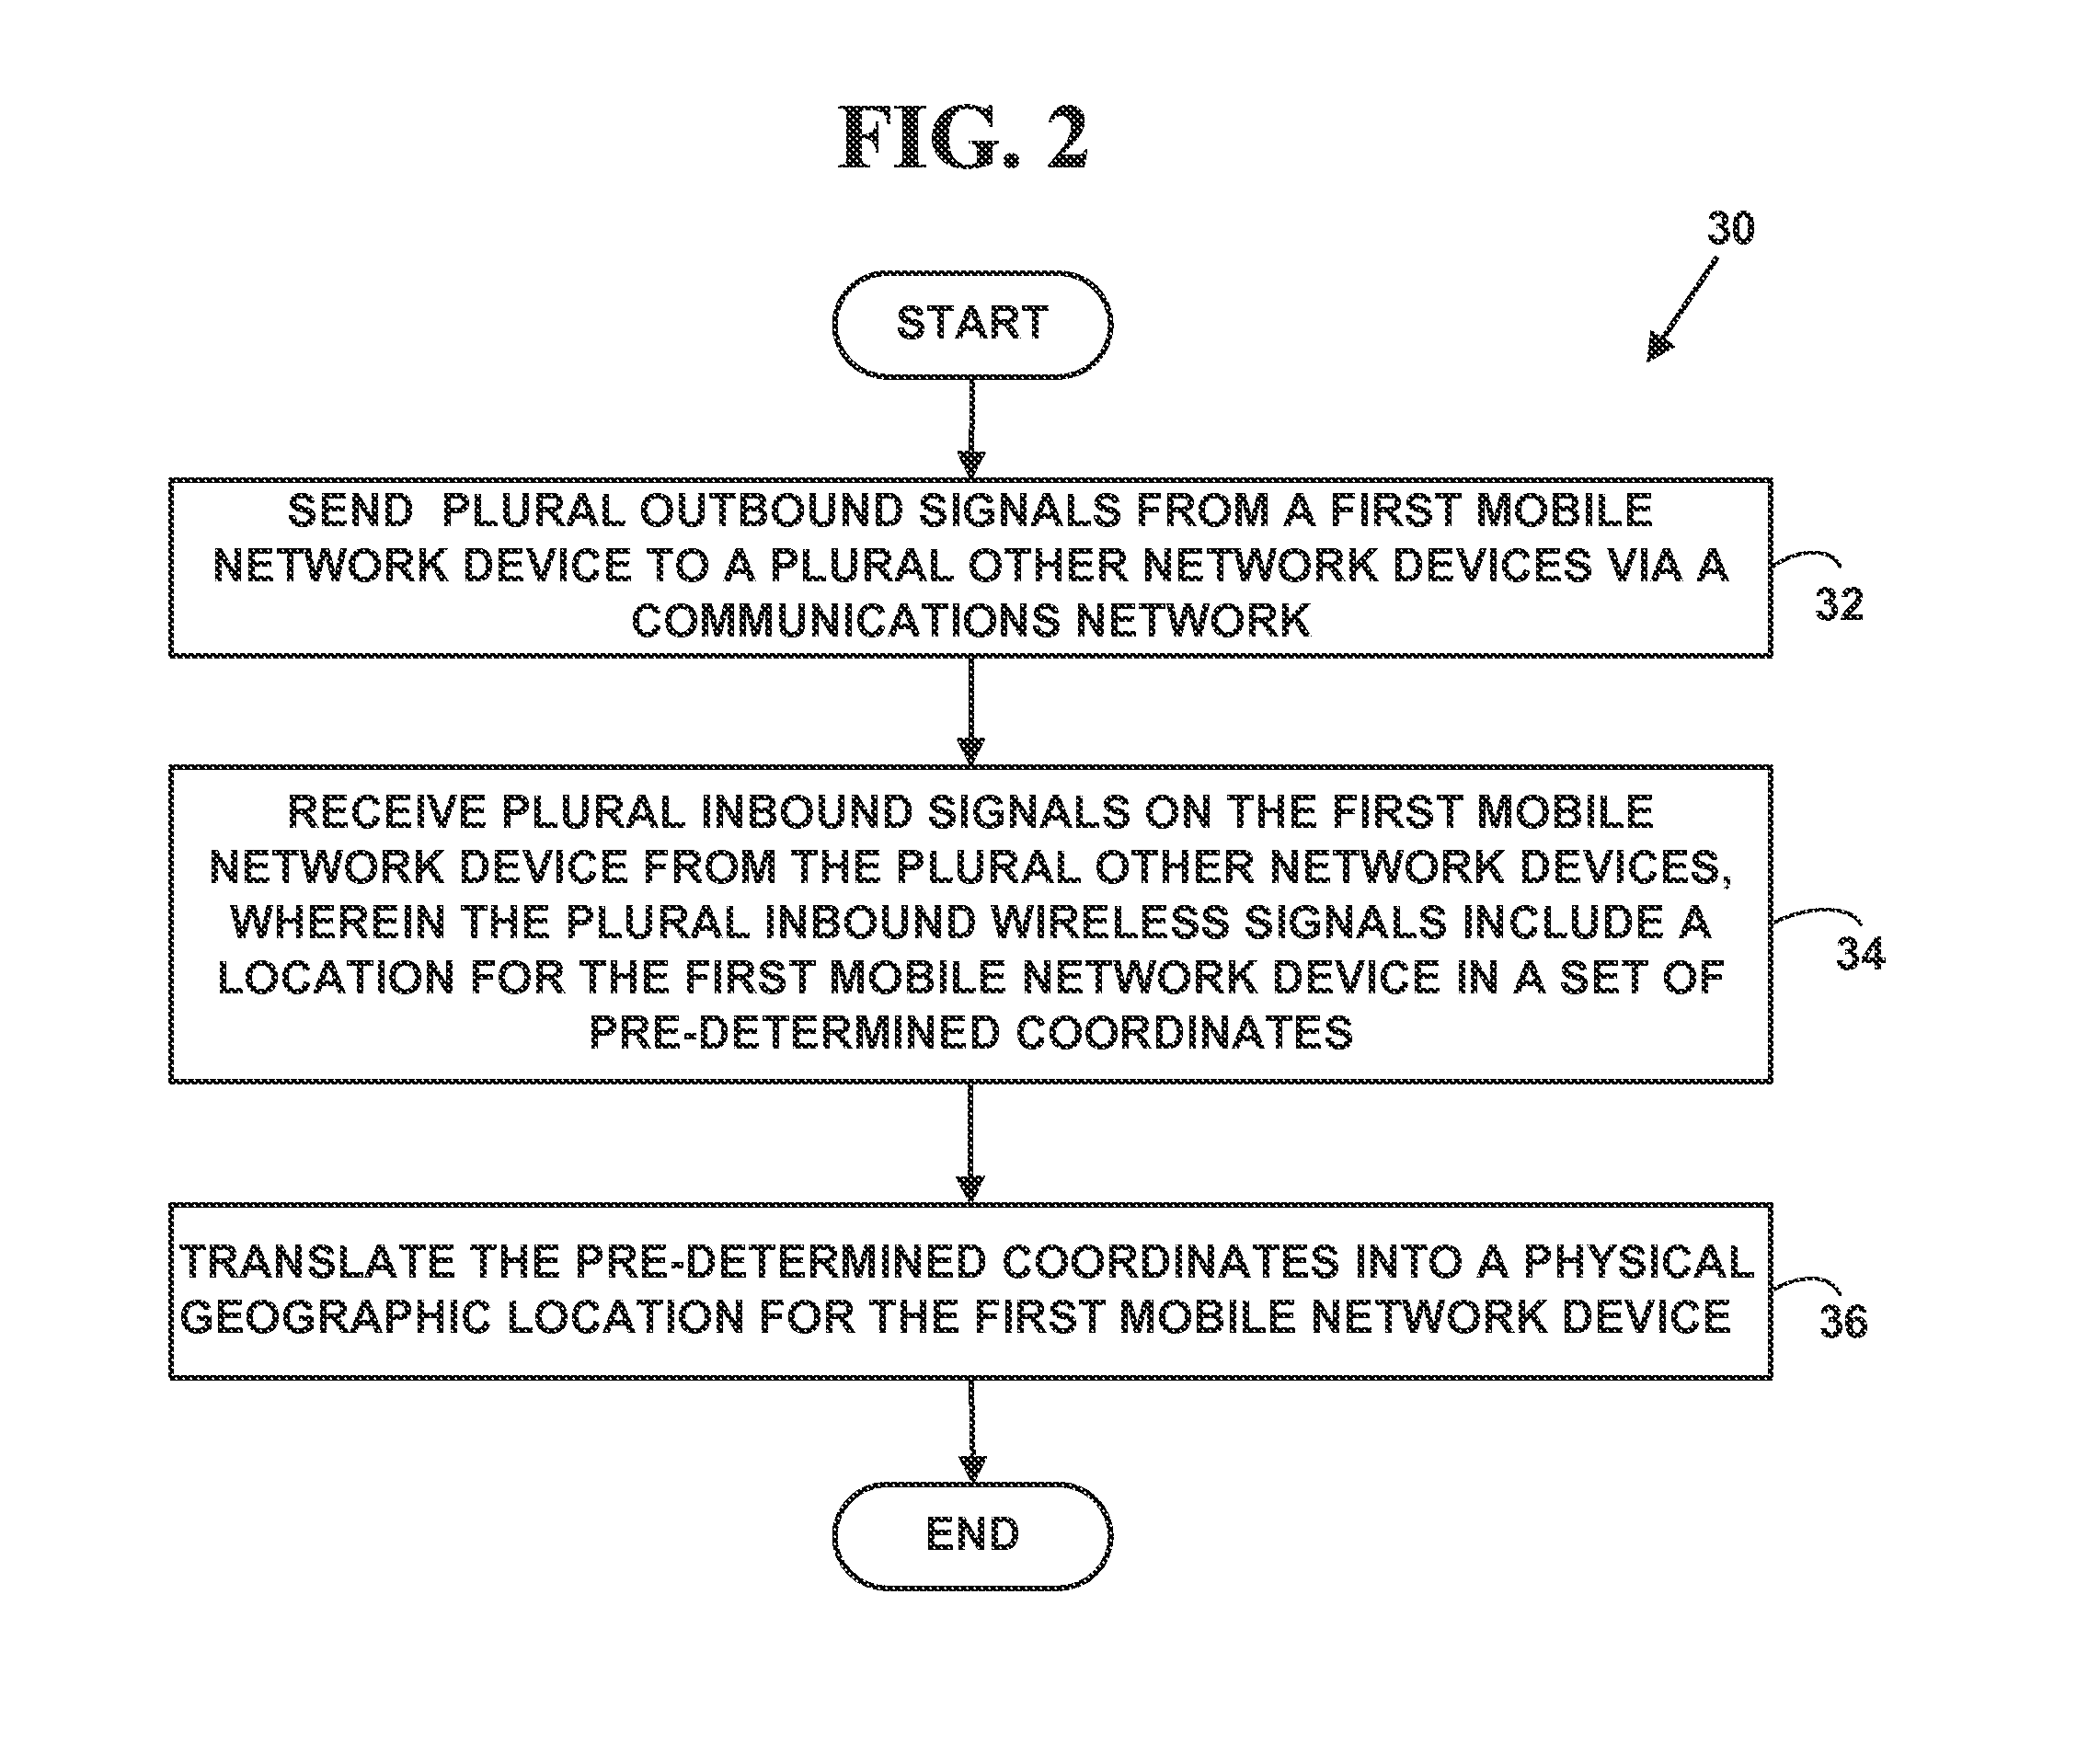 Method and system for an emergency location information service (E-LIS)